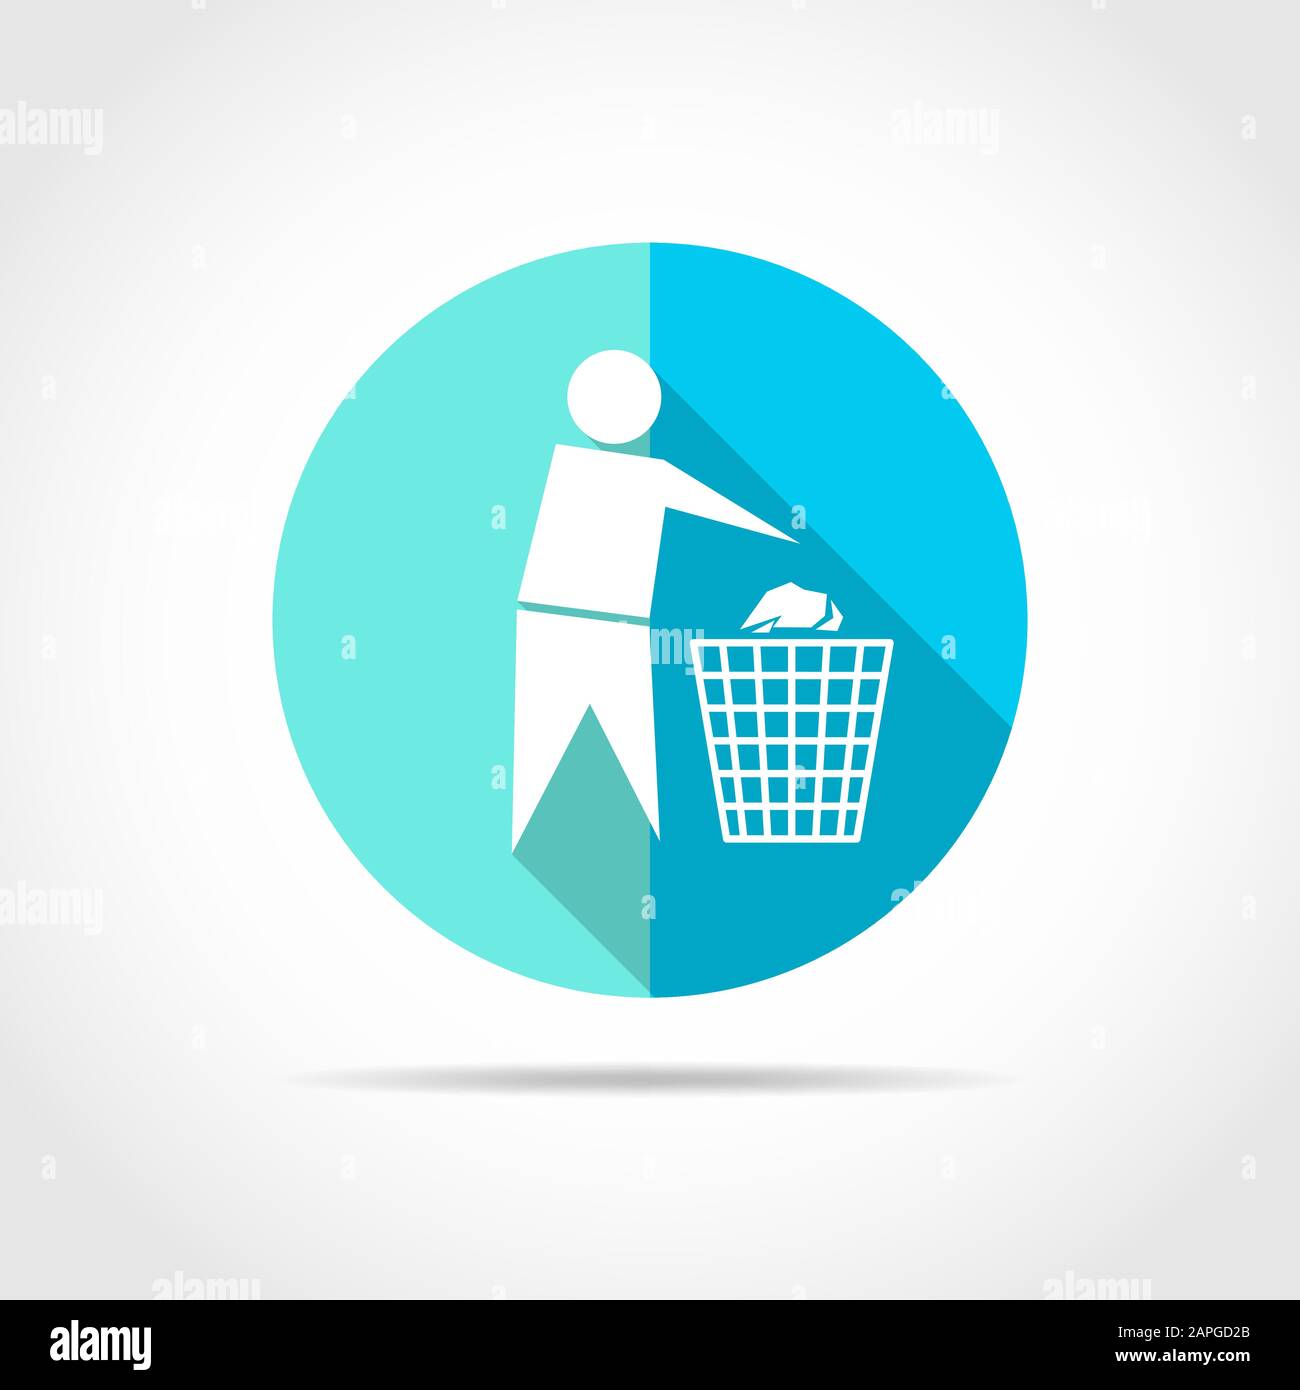 White Trash and man sign in flat design with long shadow. Vector illustration. Simple recycling icon on blue round button. Stock Vector